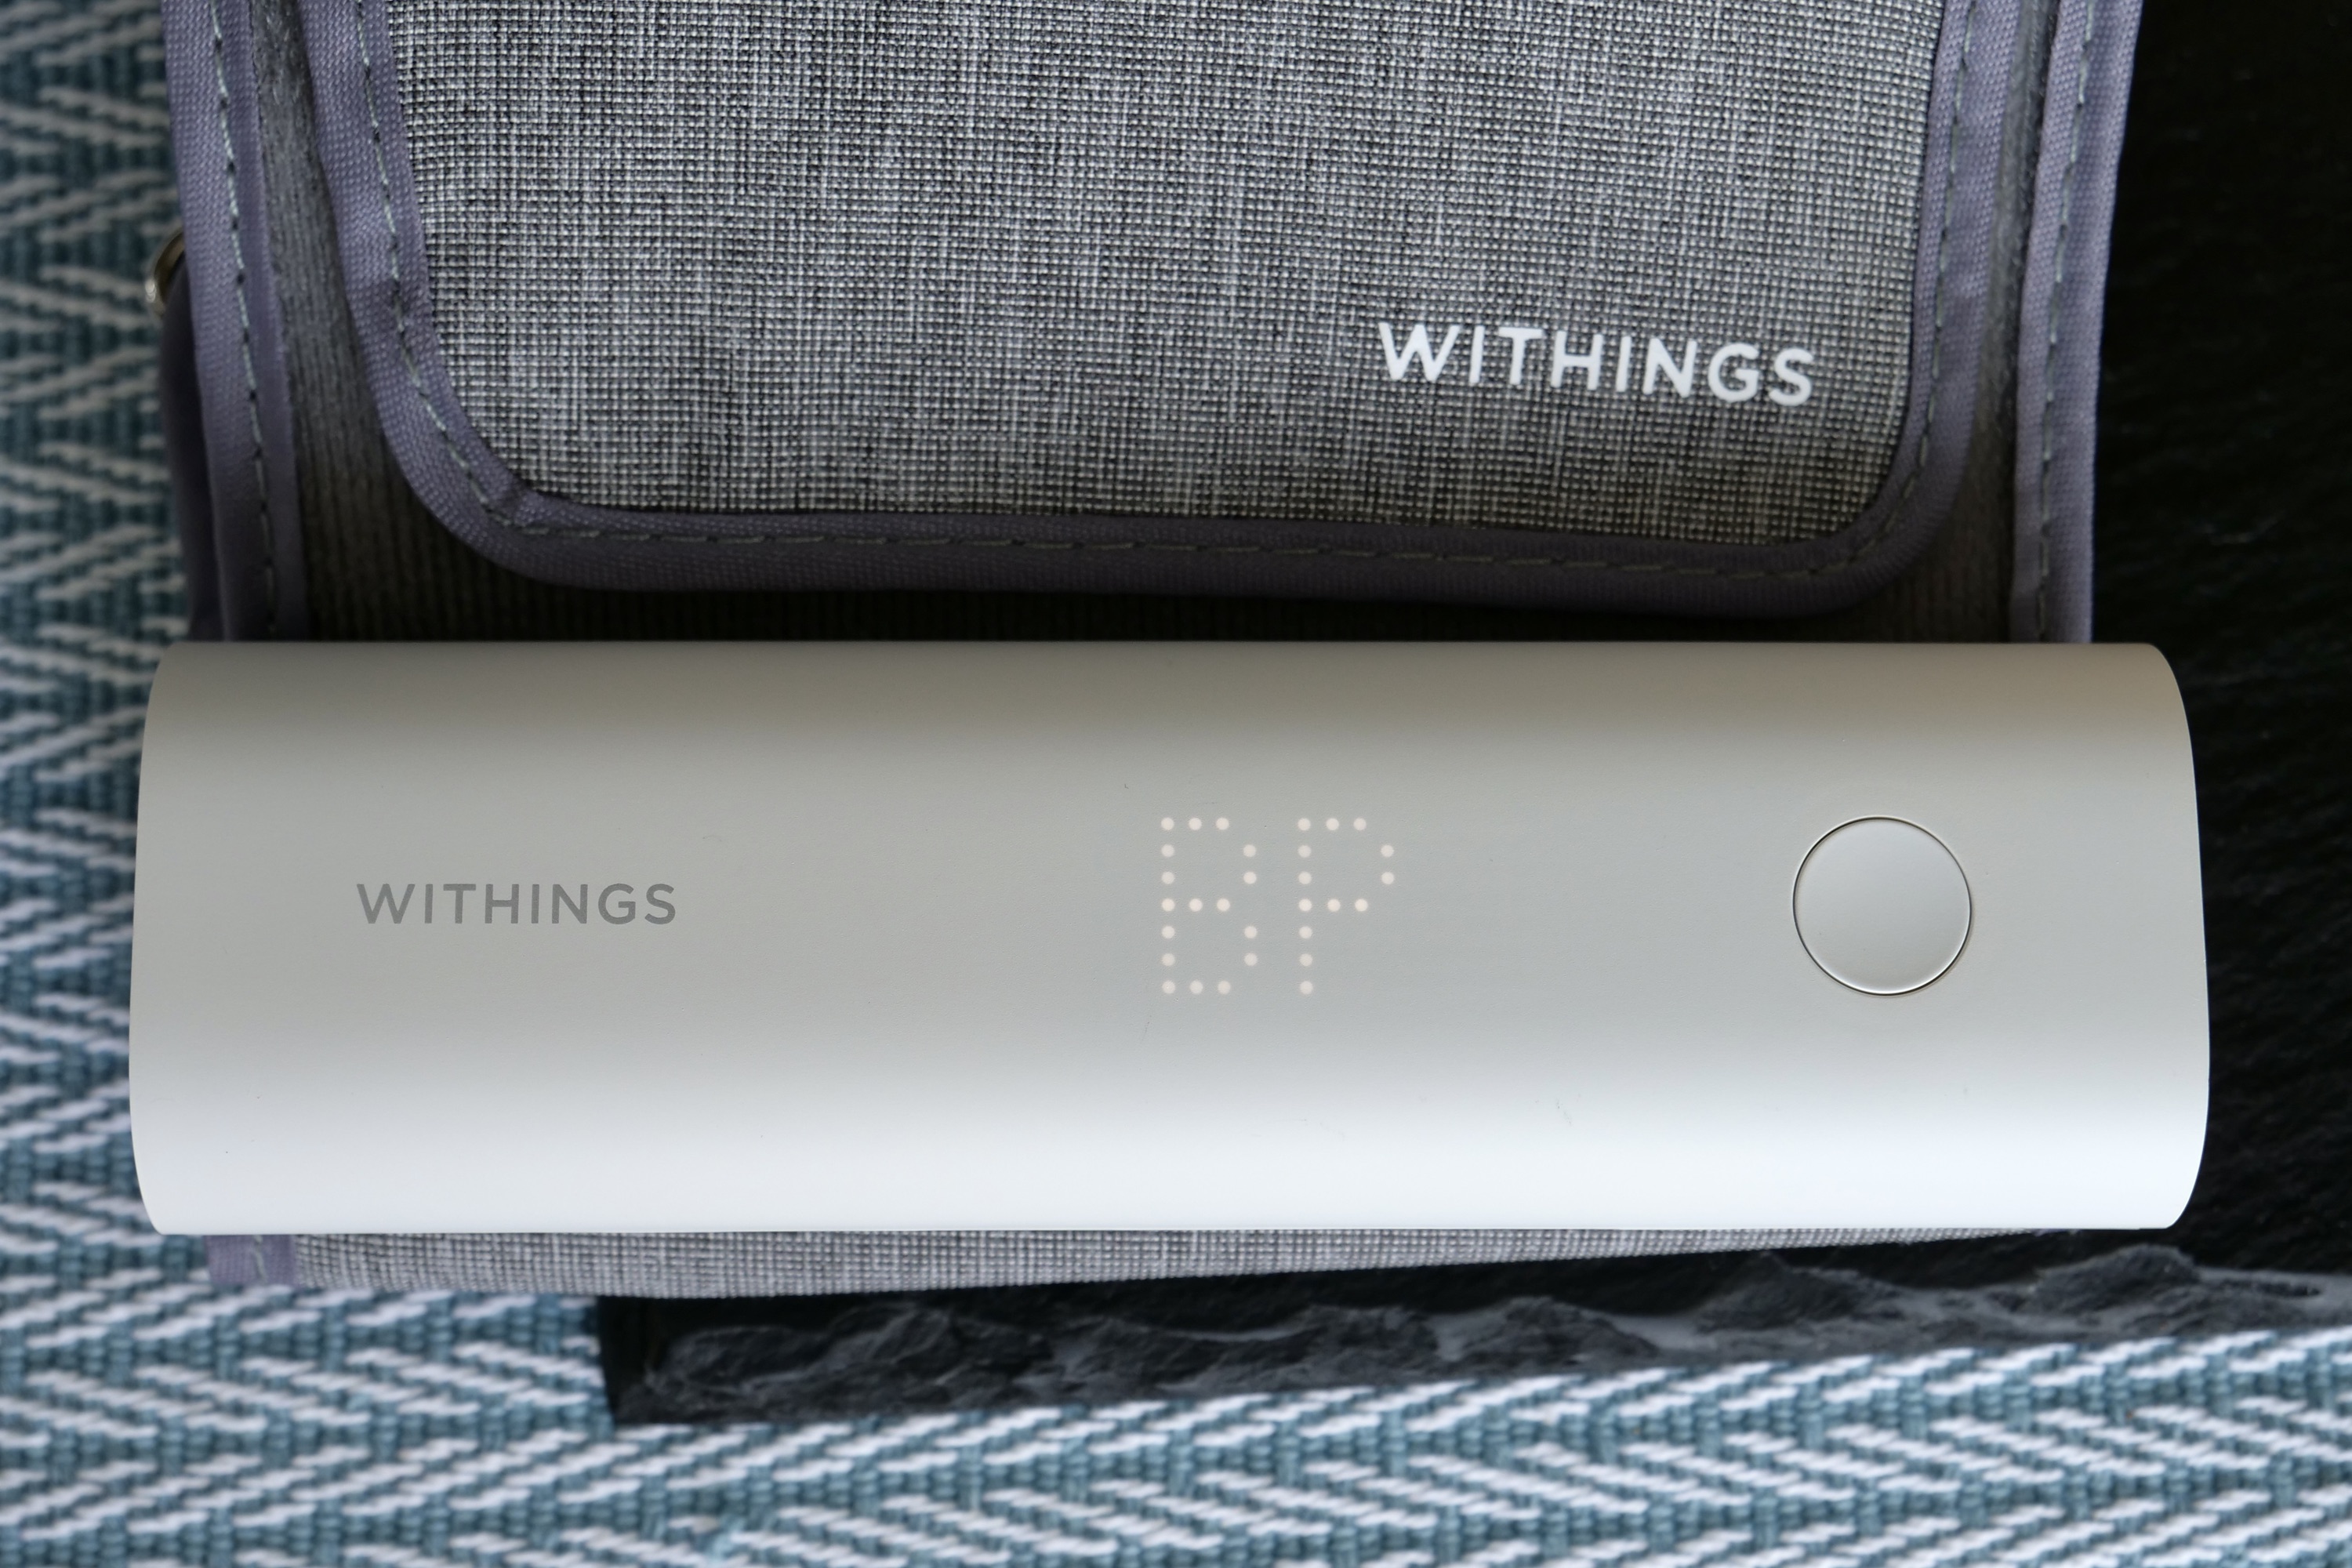 https://www.digitaltrends.com/wp-content/uploads/2023/05/Withings-BPM-Connect-Screen.jpg?fit=3000%2C2000&p=1